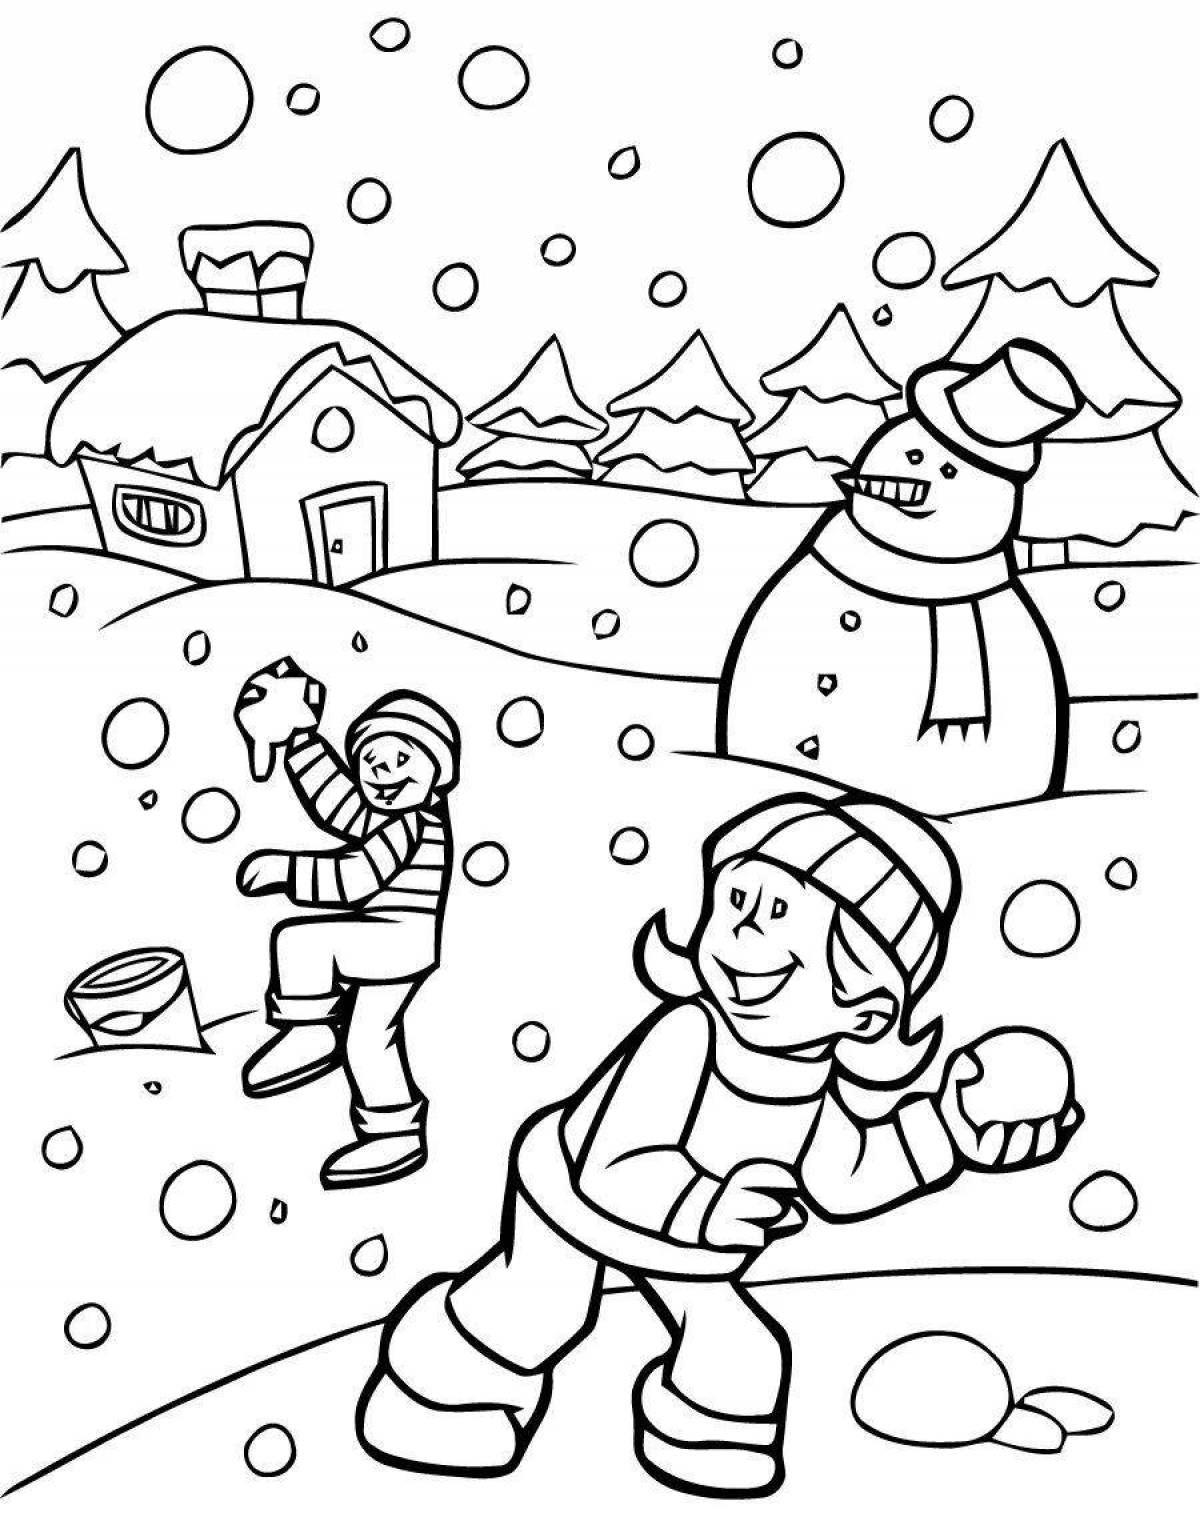 Charming winter day coloring book